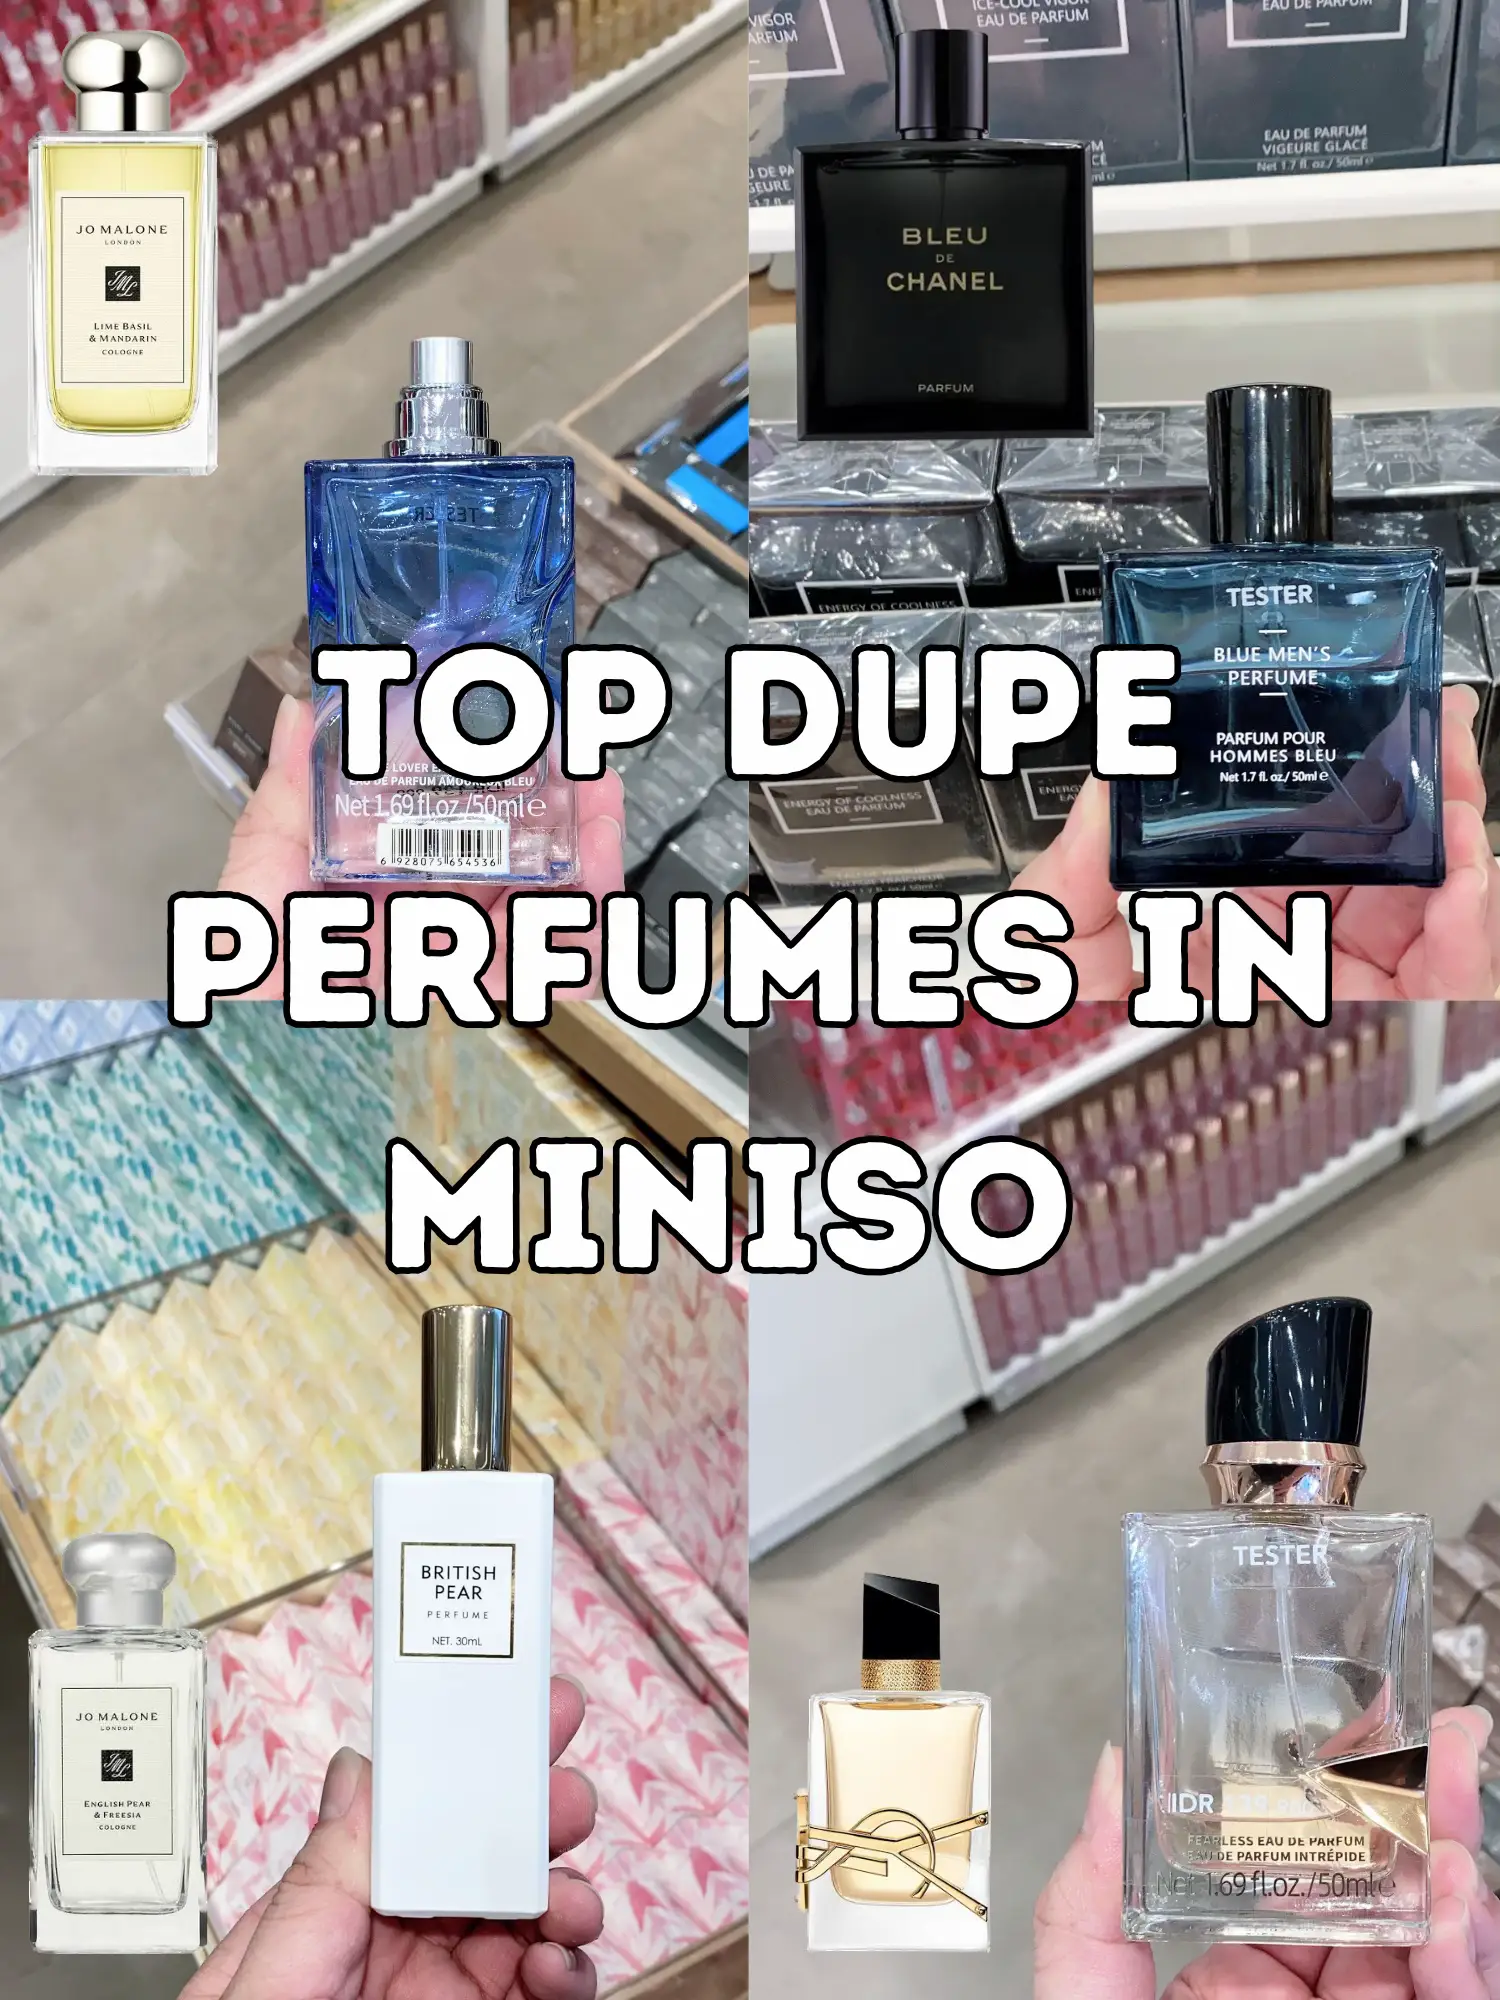 Top dupe perfume in Miniso, Gallery posted by anderscent